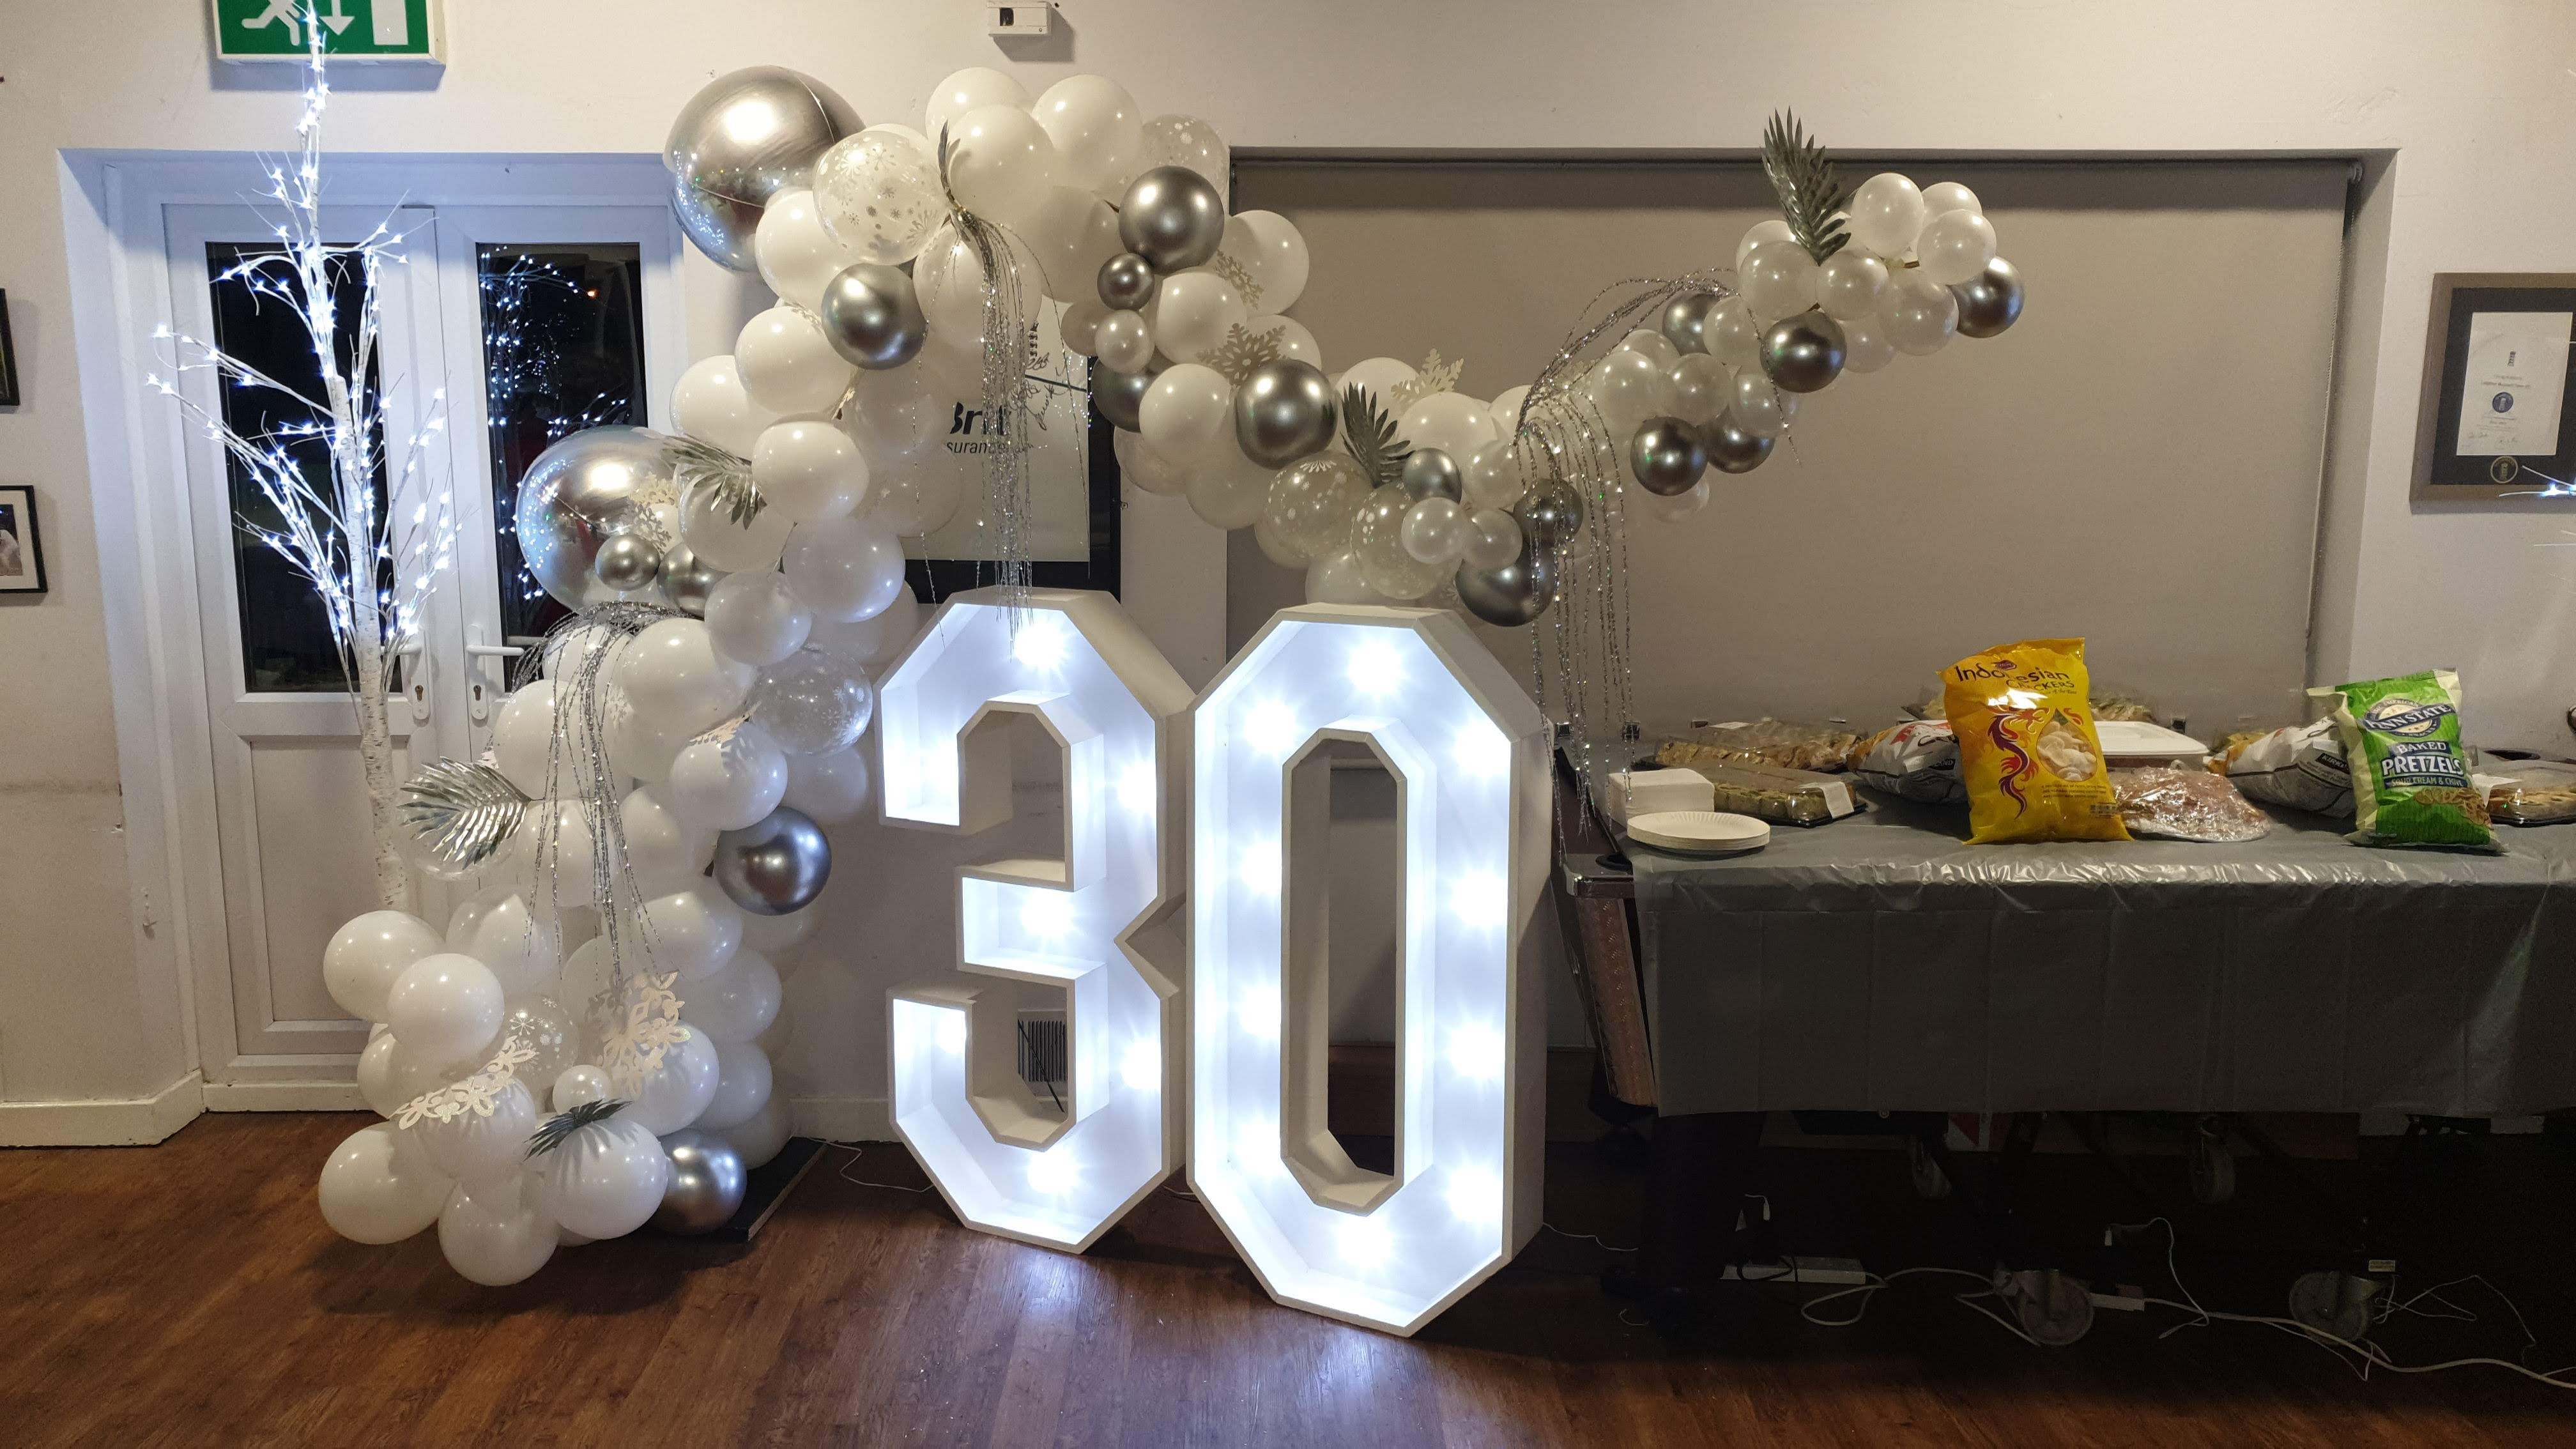 Light_Up_Numbers_30_006